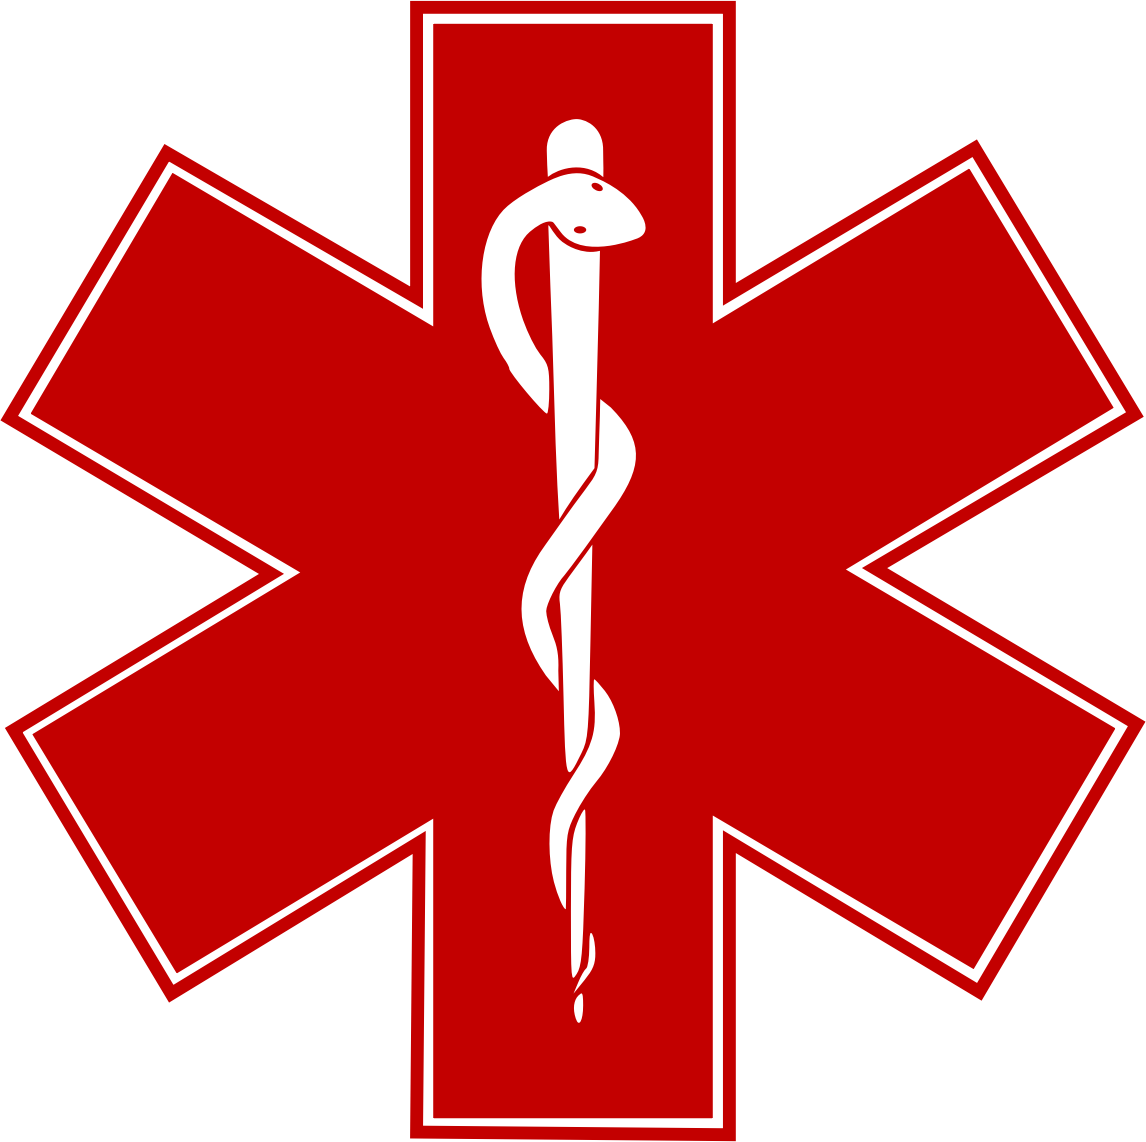 A Red And White Symbol With A Snake On It